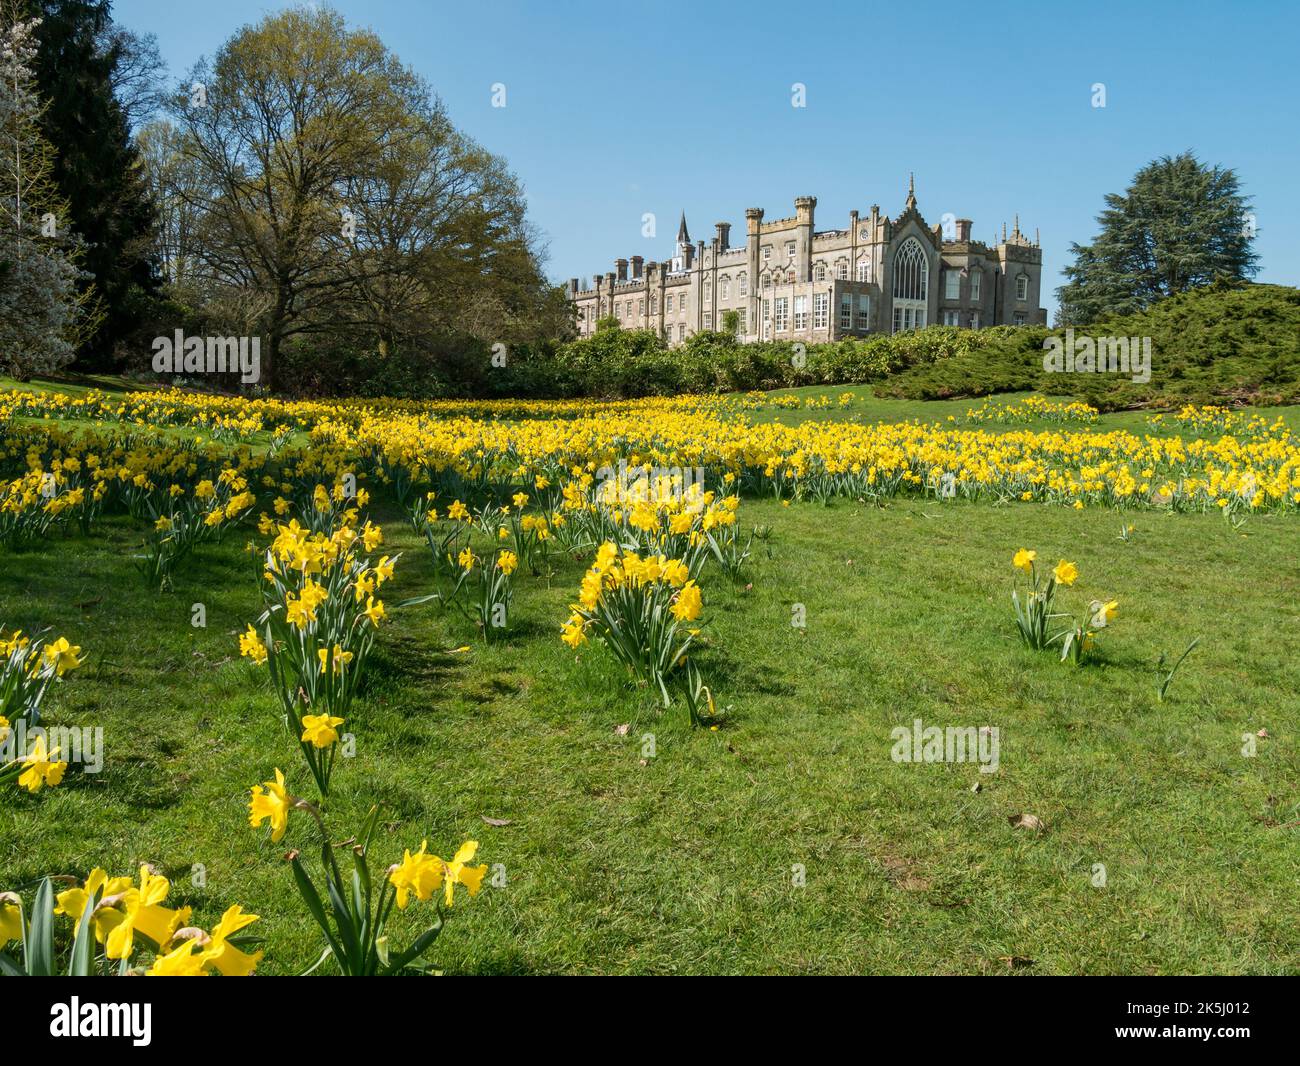 Sheffield Park House and Gardens with Yellow Daffodils in Spring, East Sussex, England, UK Stockfoto